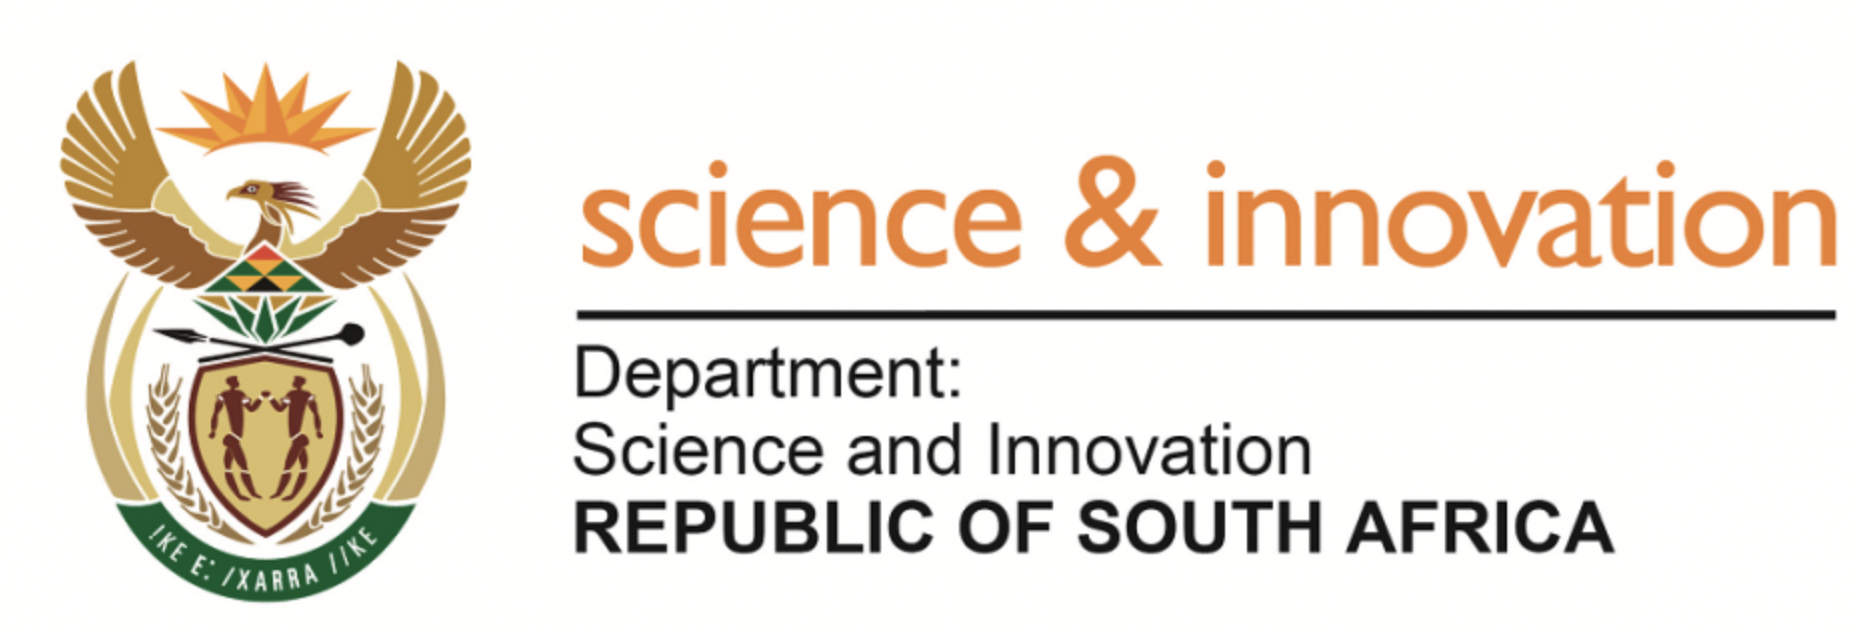 DEPARTMENT OF SCIENCE AND INNOVATION VACANCIES